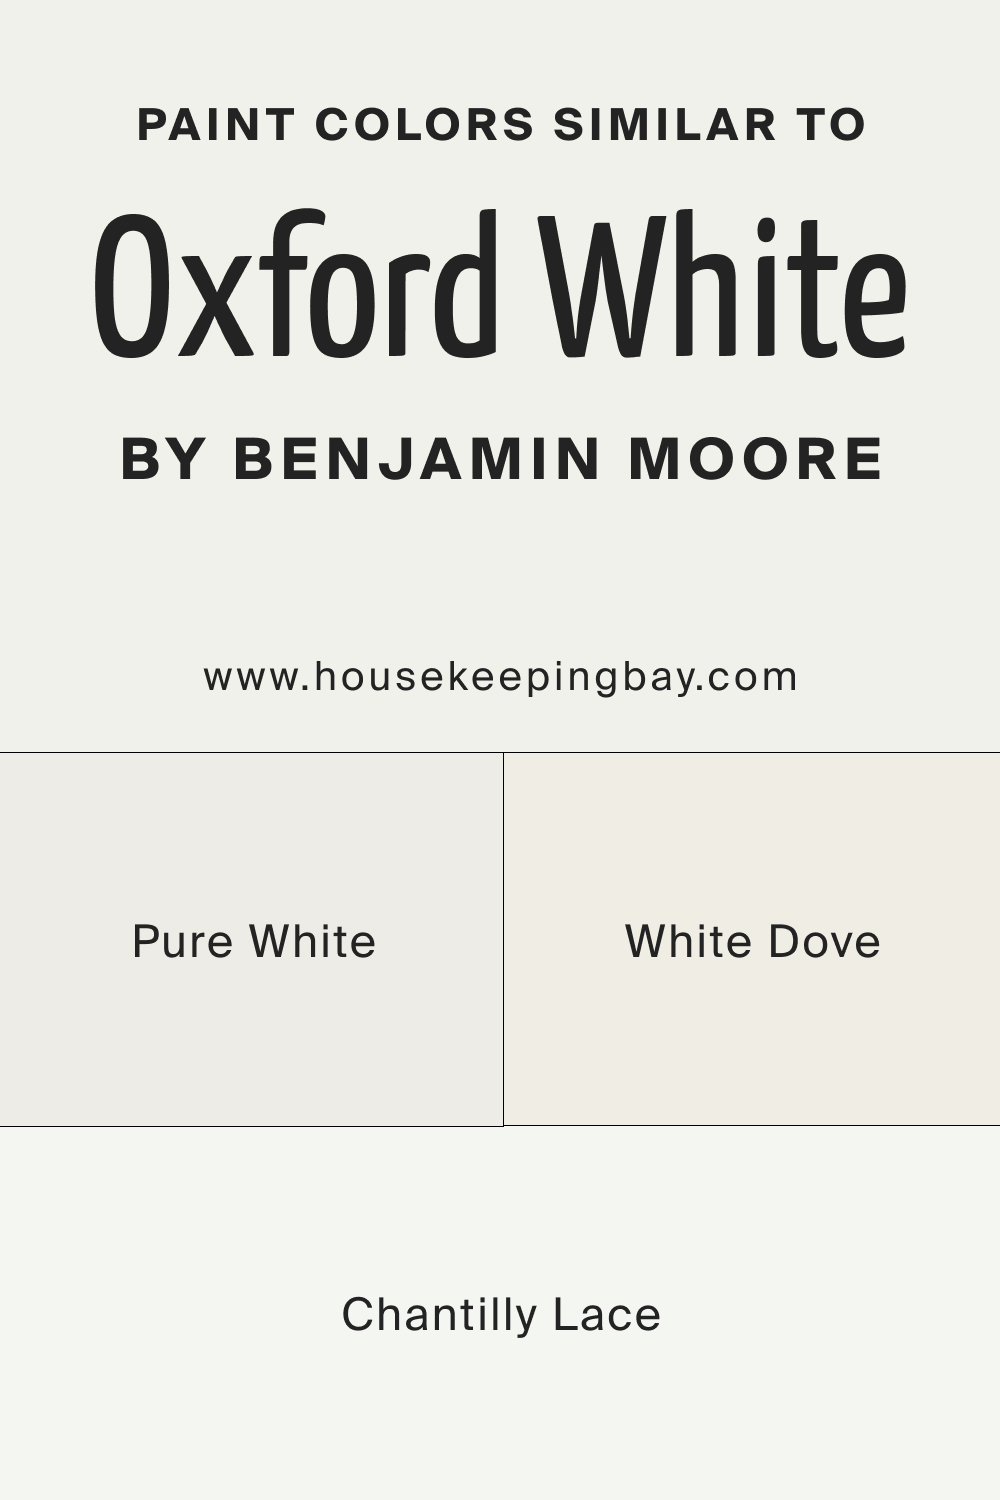 Paint Colors Similar to Oxford White CC 30 by Benjamin Moore